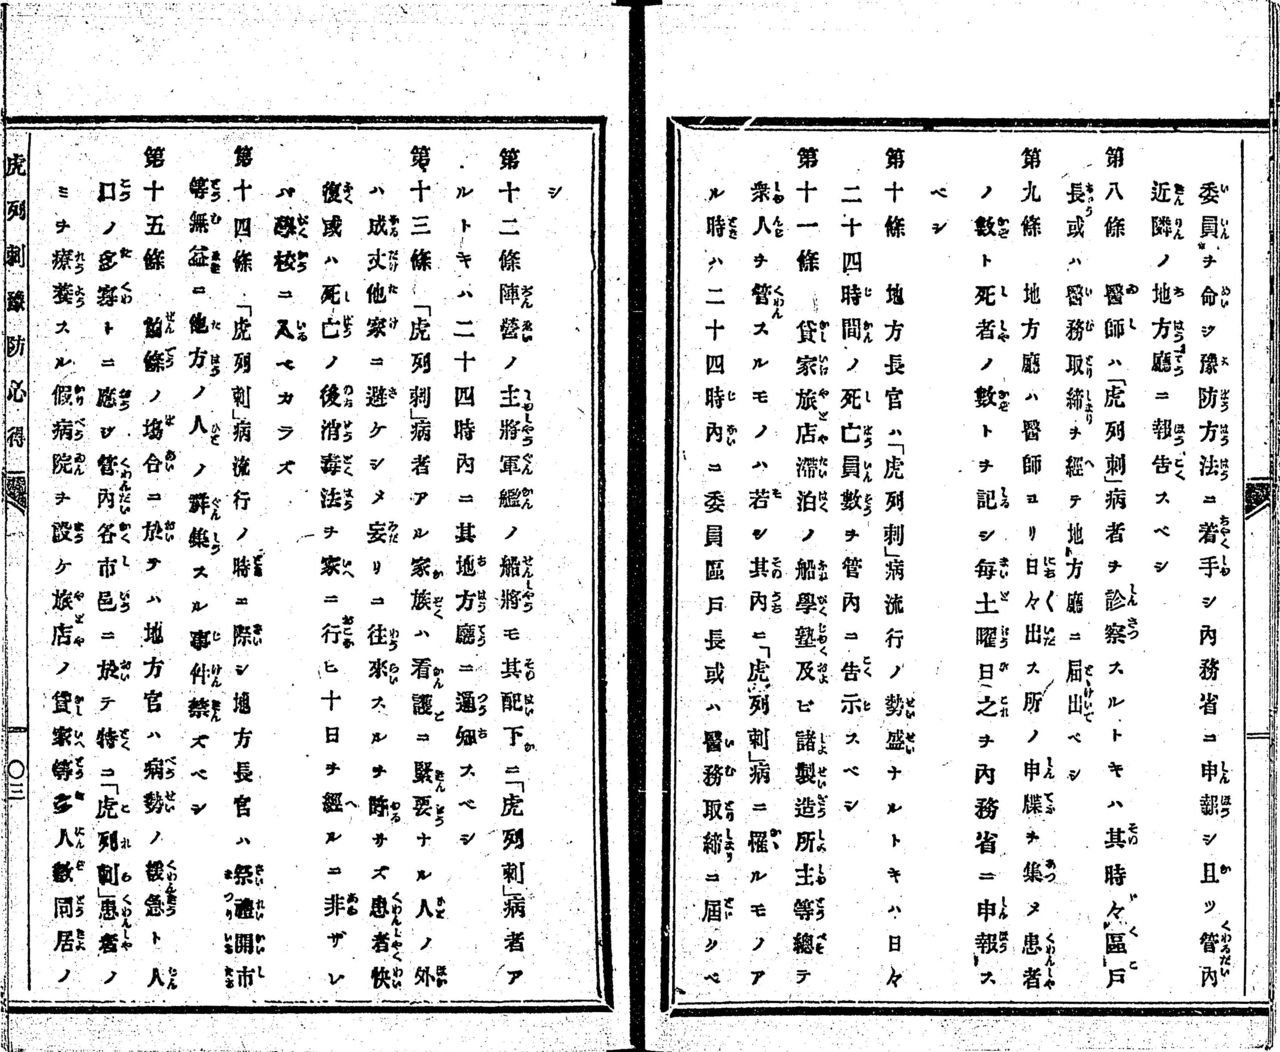 Article 13 of Ōkubo Toshimichi’s Korerabyō yobō kokoroesho (Instructions on Cholera Prevention). It includes provisions that after a patient has died or recovered, the family should disinfect the house and members may not attend school until 10 days have passed. (Courtesy National Diet Library)